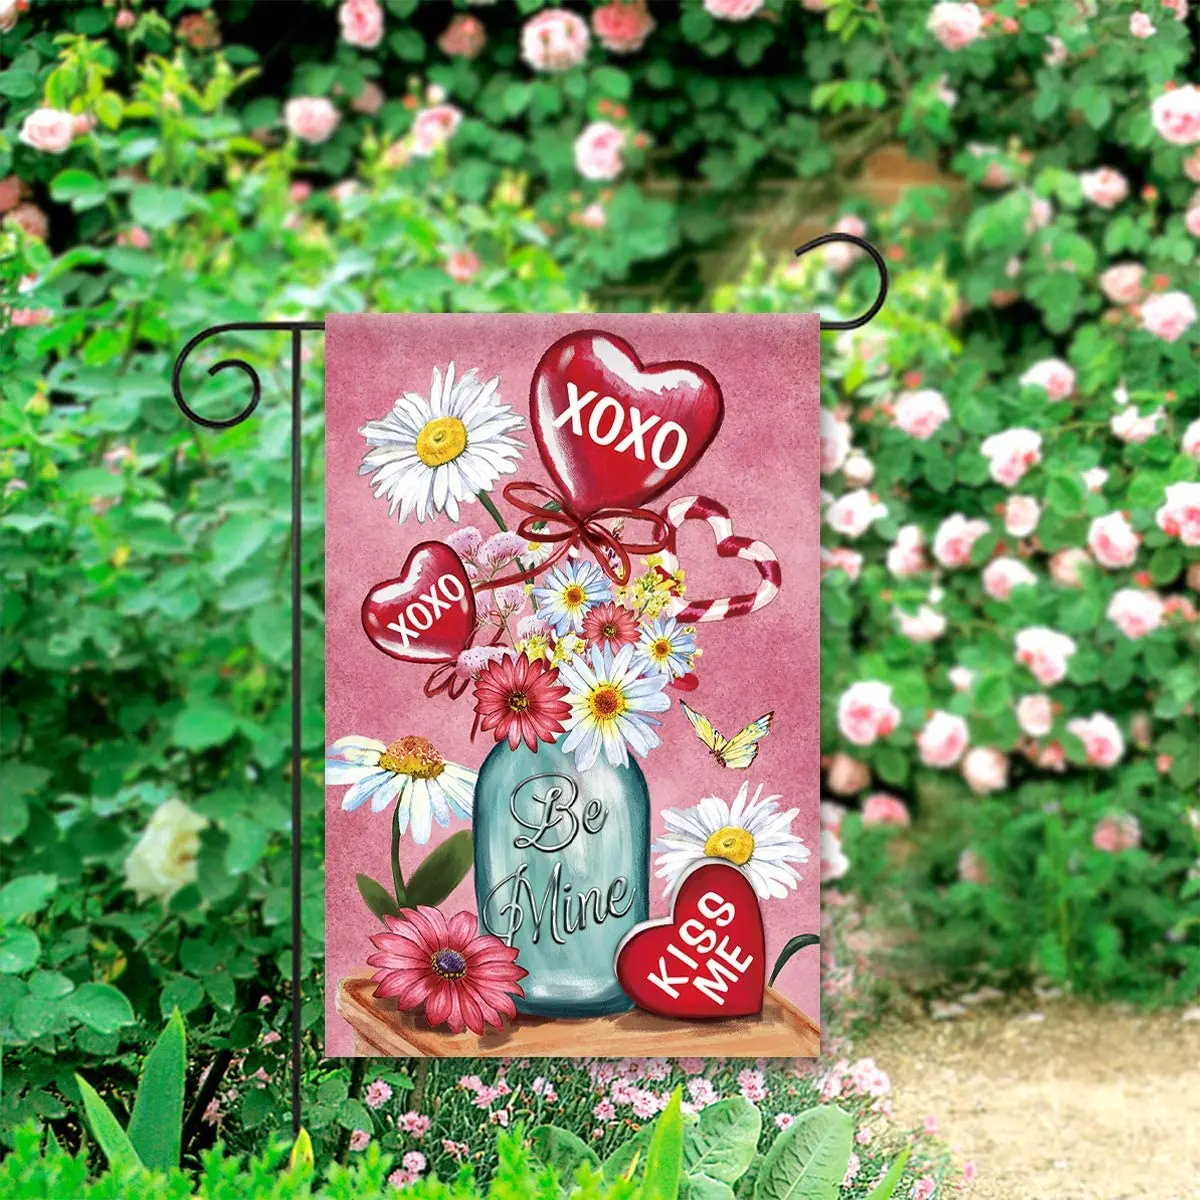 

Be Mine Kiss Me Jar Valentine's Day Bouquet Decorative Daisy Garden Flag Banner for Outside House Yard Home Decorative